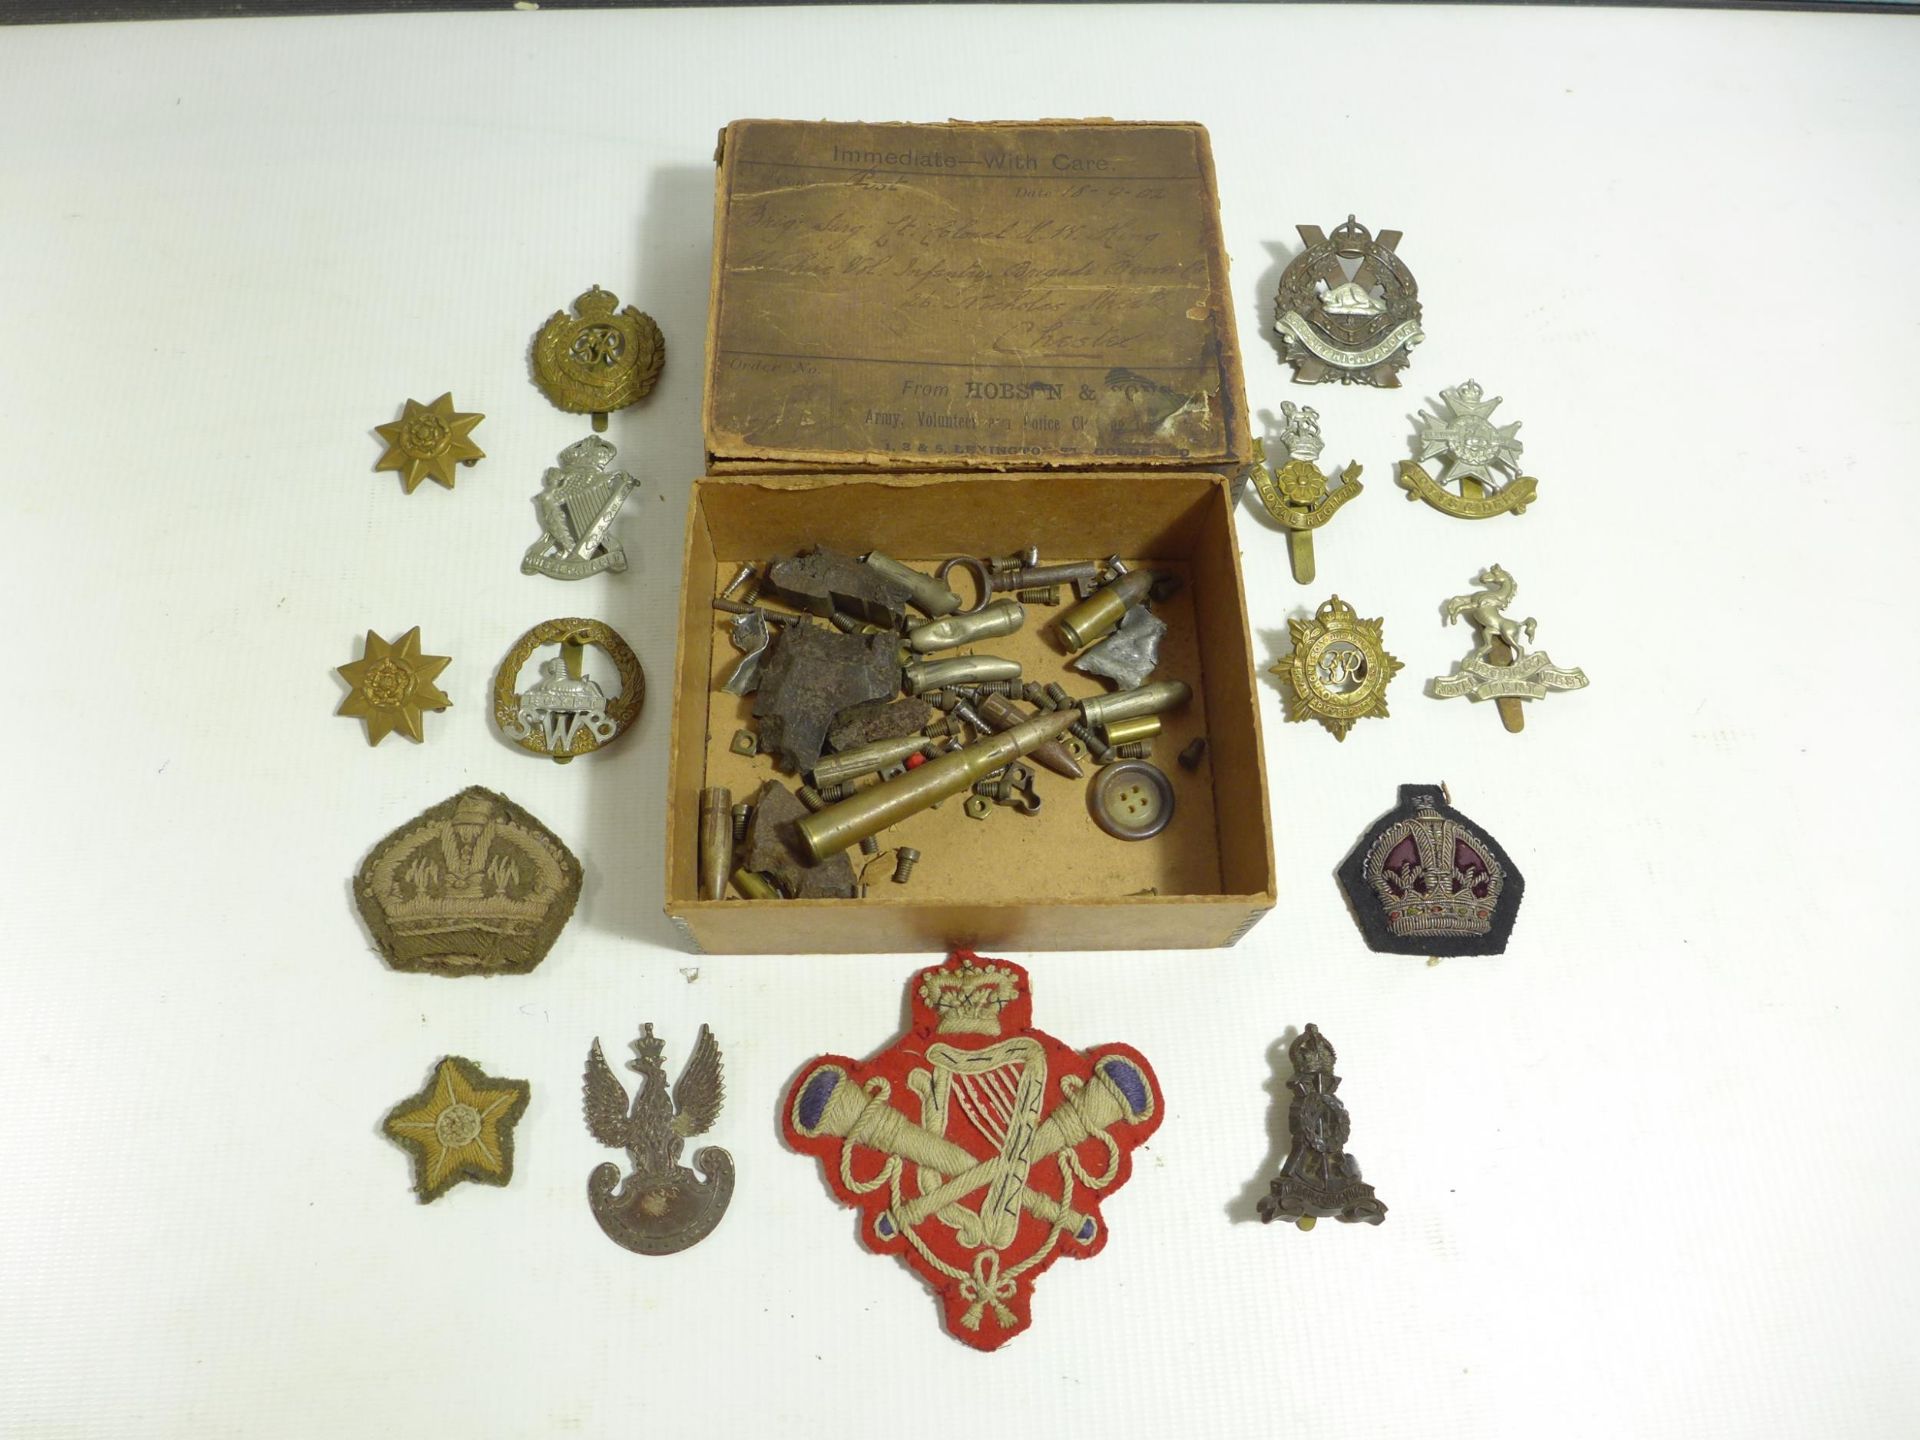 A BOER WAR PERIOD BOX CONTAINING NUMEROUS WORLD WAR I AND WORLD WAR II BADGES TO INCLUDE POLISH ARMY